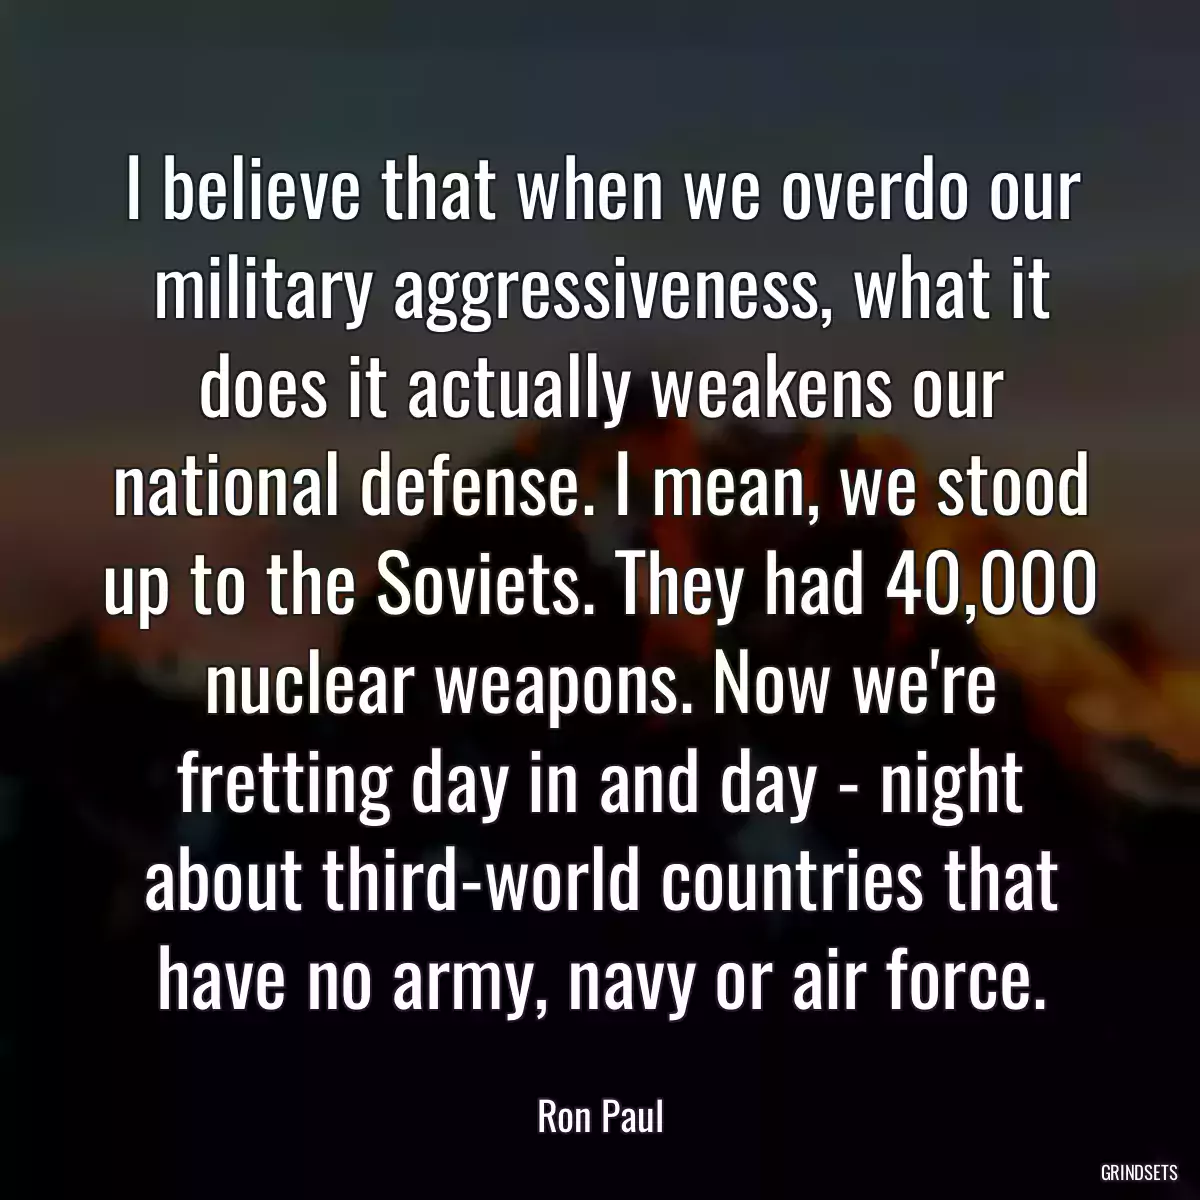 I believe that when we overdo our military aggressiveness, what it does it actually weakens our national defense. I mean, we stood up to the Soviets. They had 40,000 nuclear weapons. Now we\'re fretting day in and day - night about third-world countries that have no army, navy or air force.